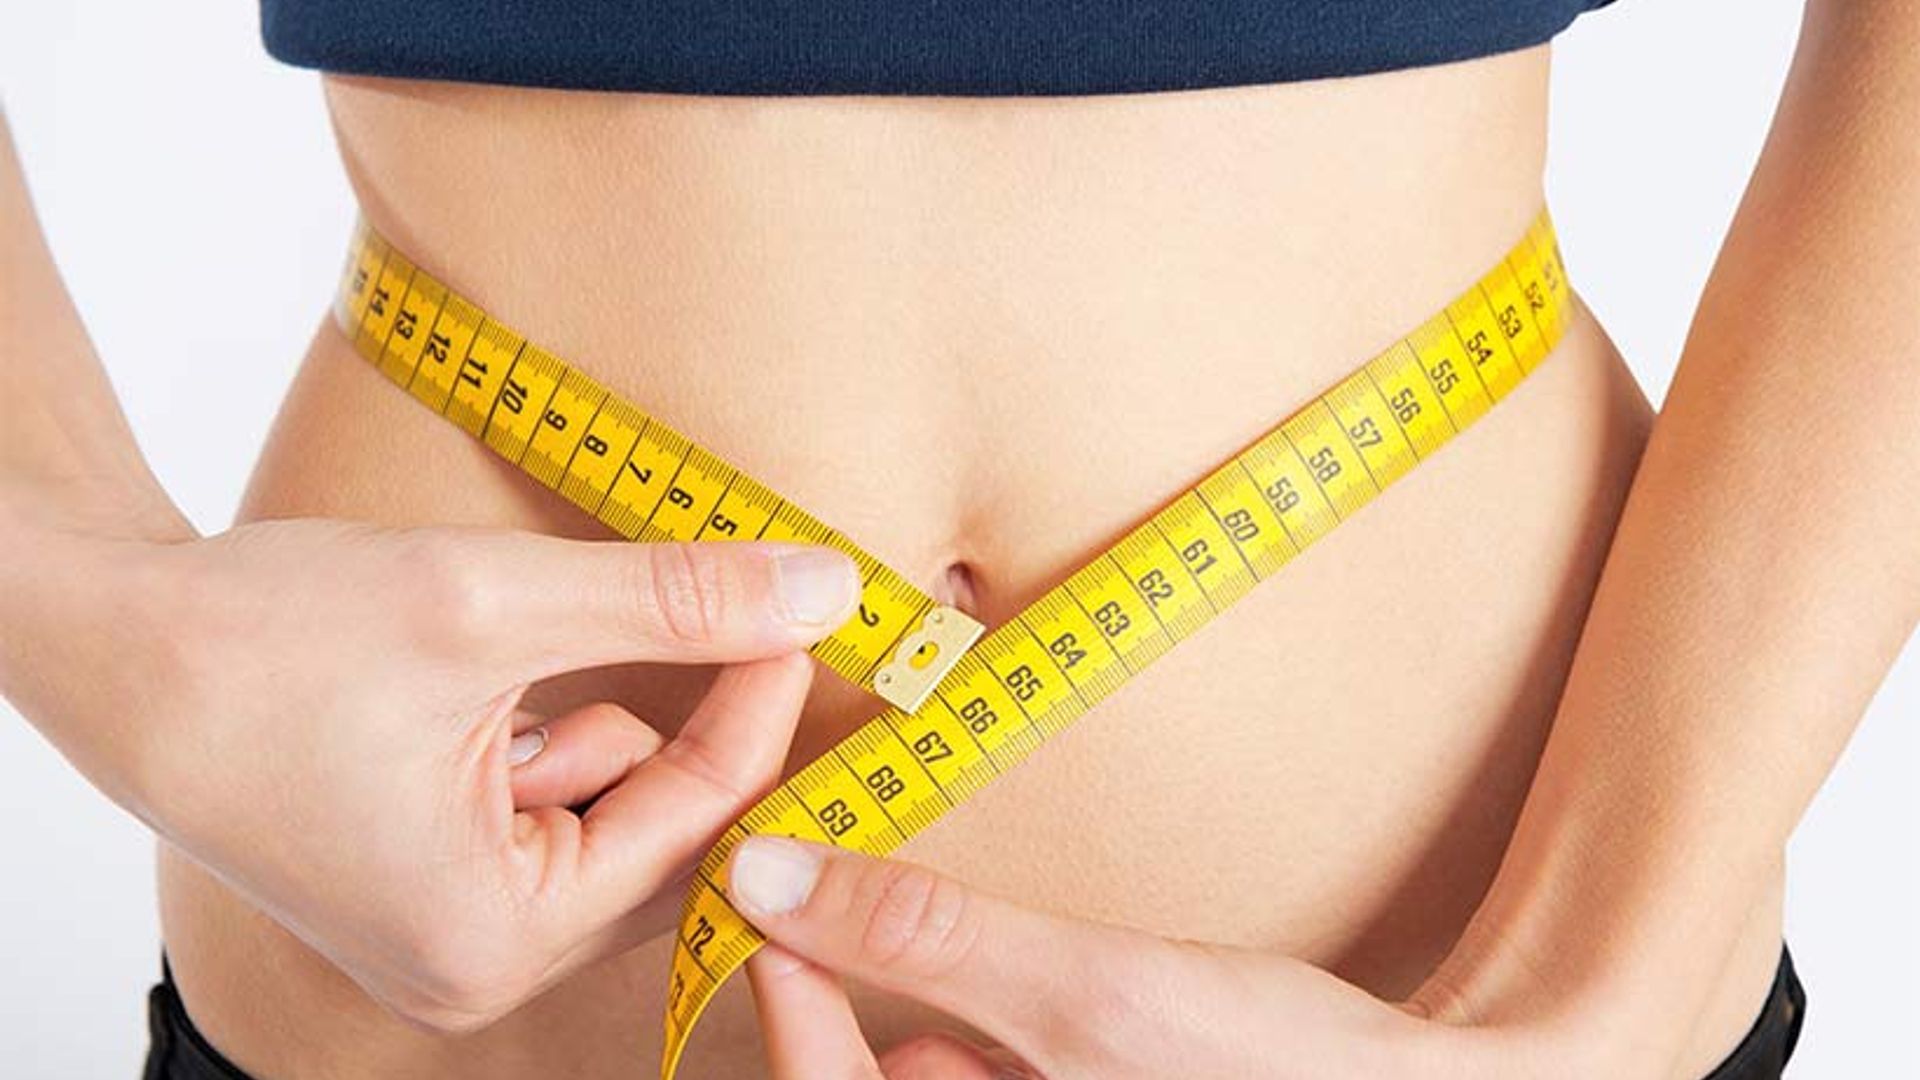 Women who have higher waist to hip ratio 'increase cancer risk by 21%'